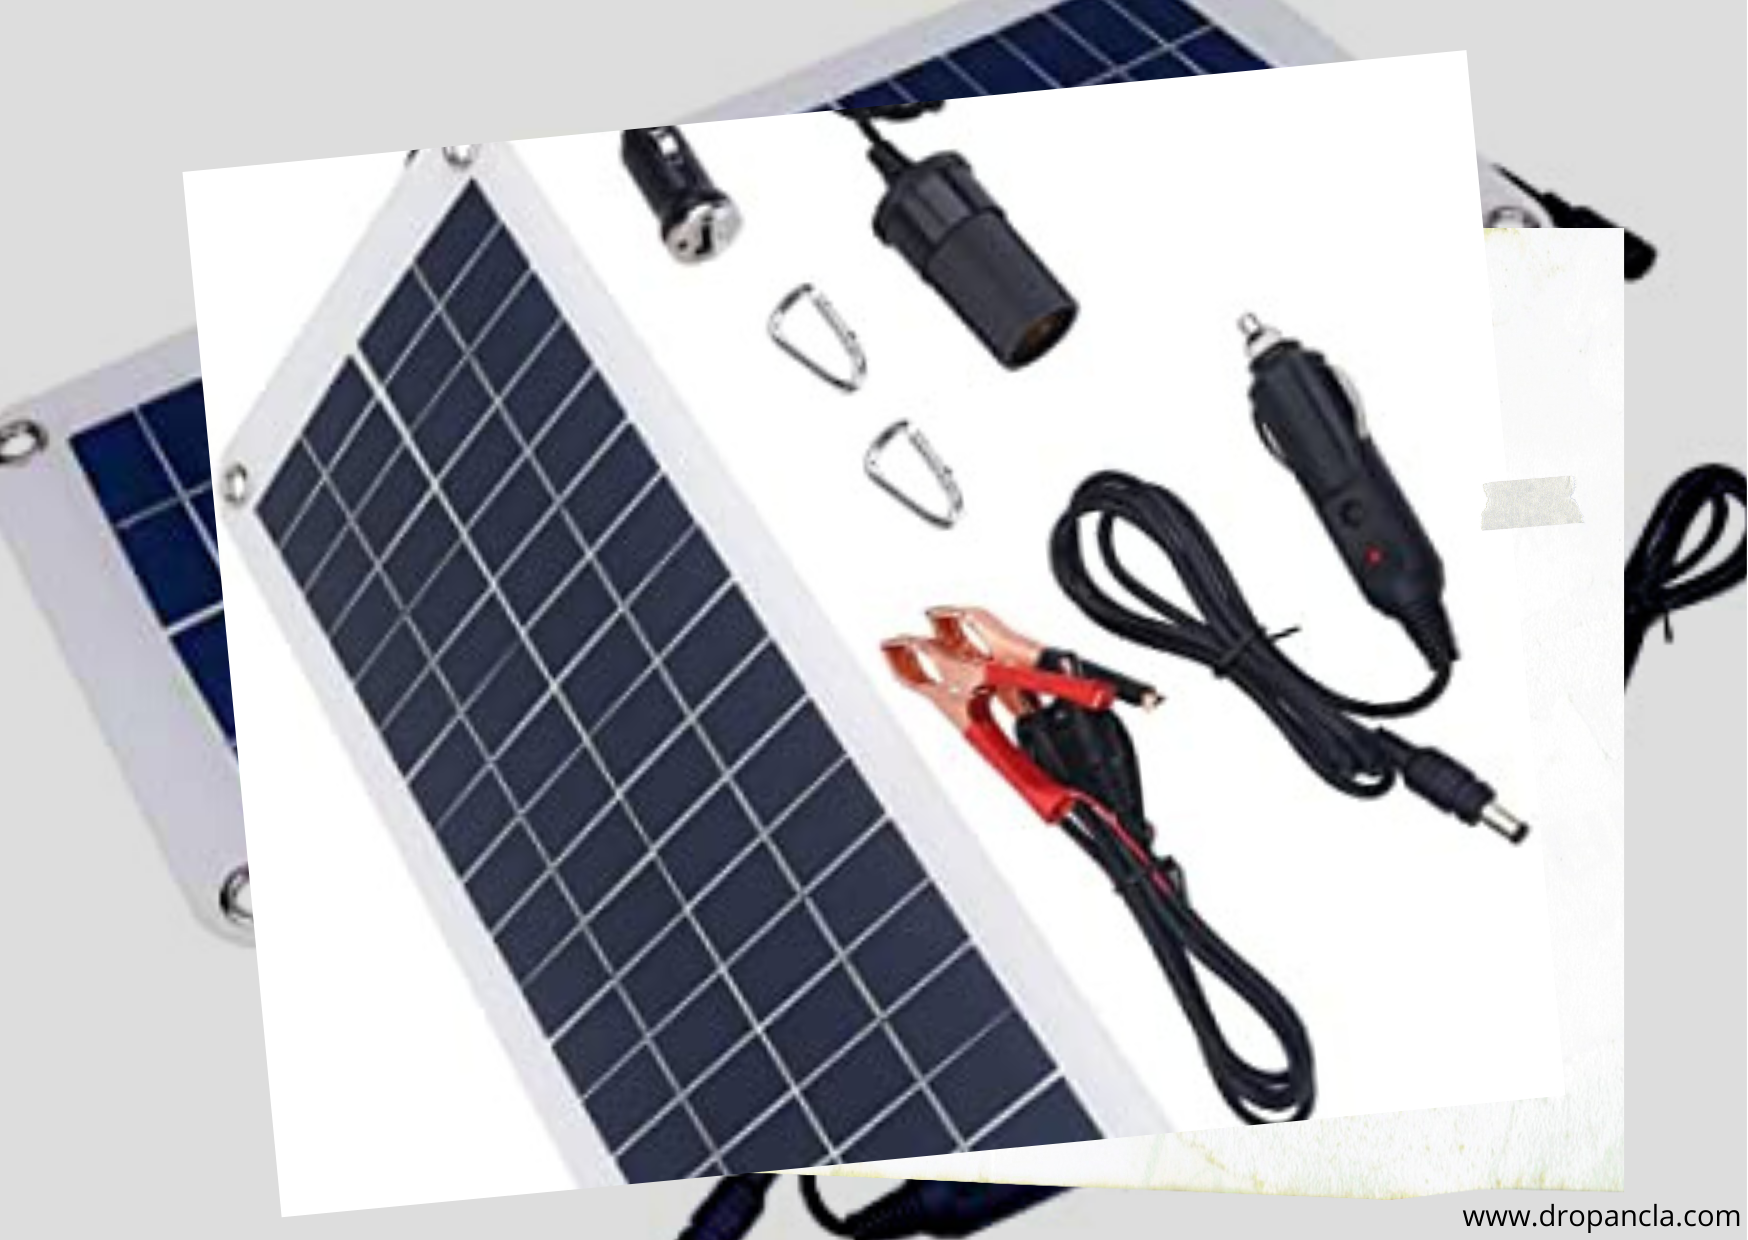 solar chargers work for boats